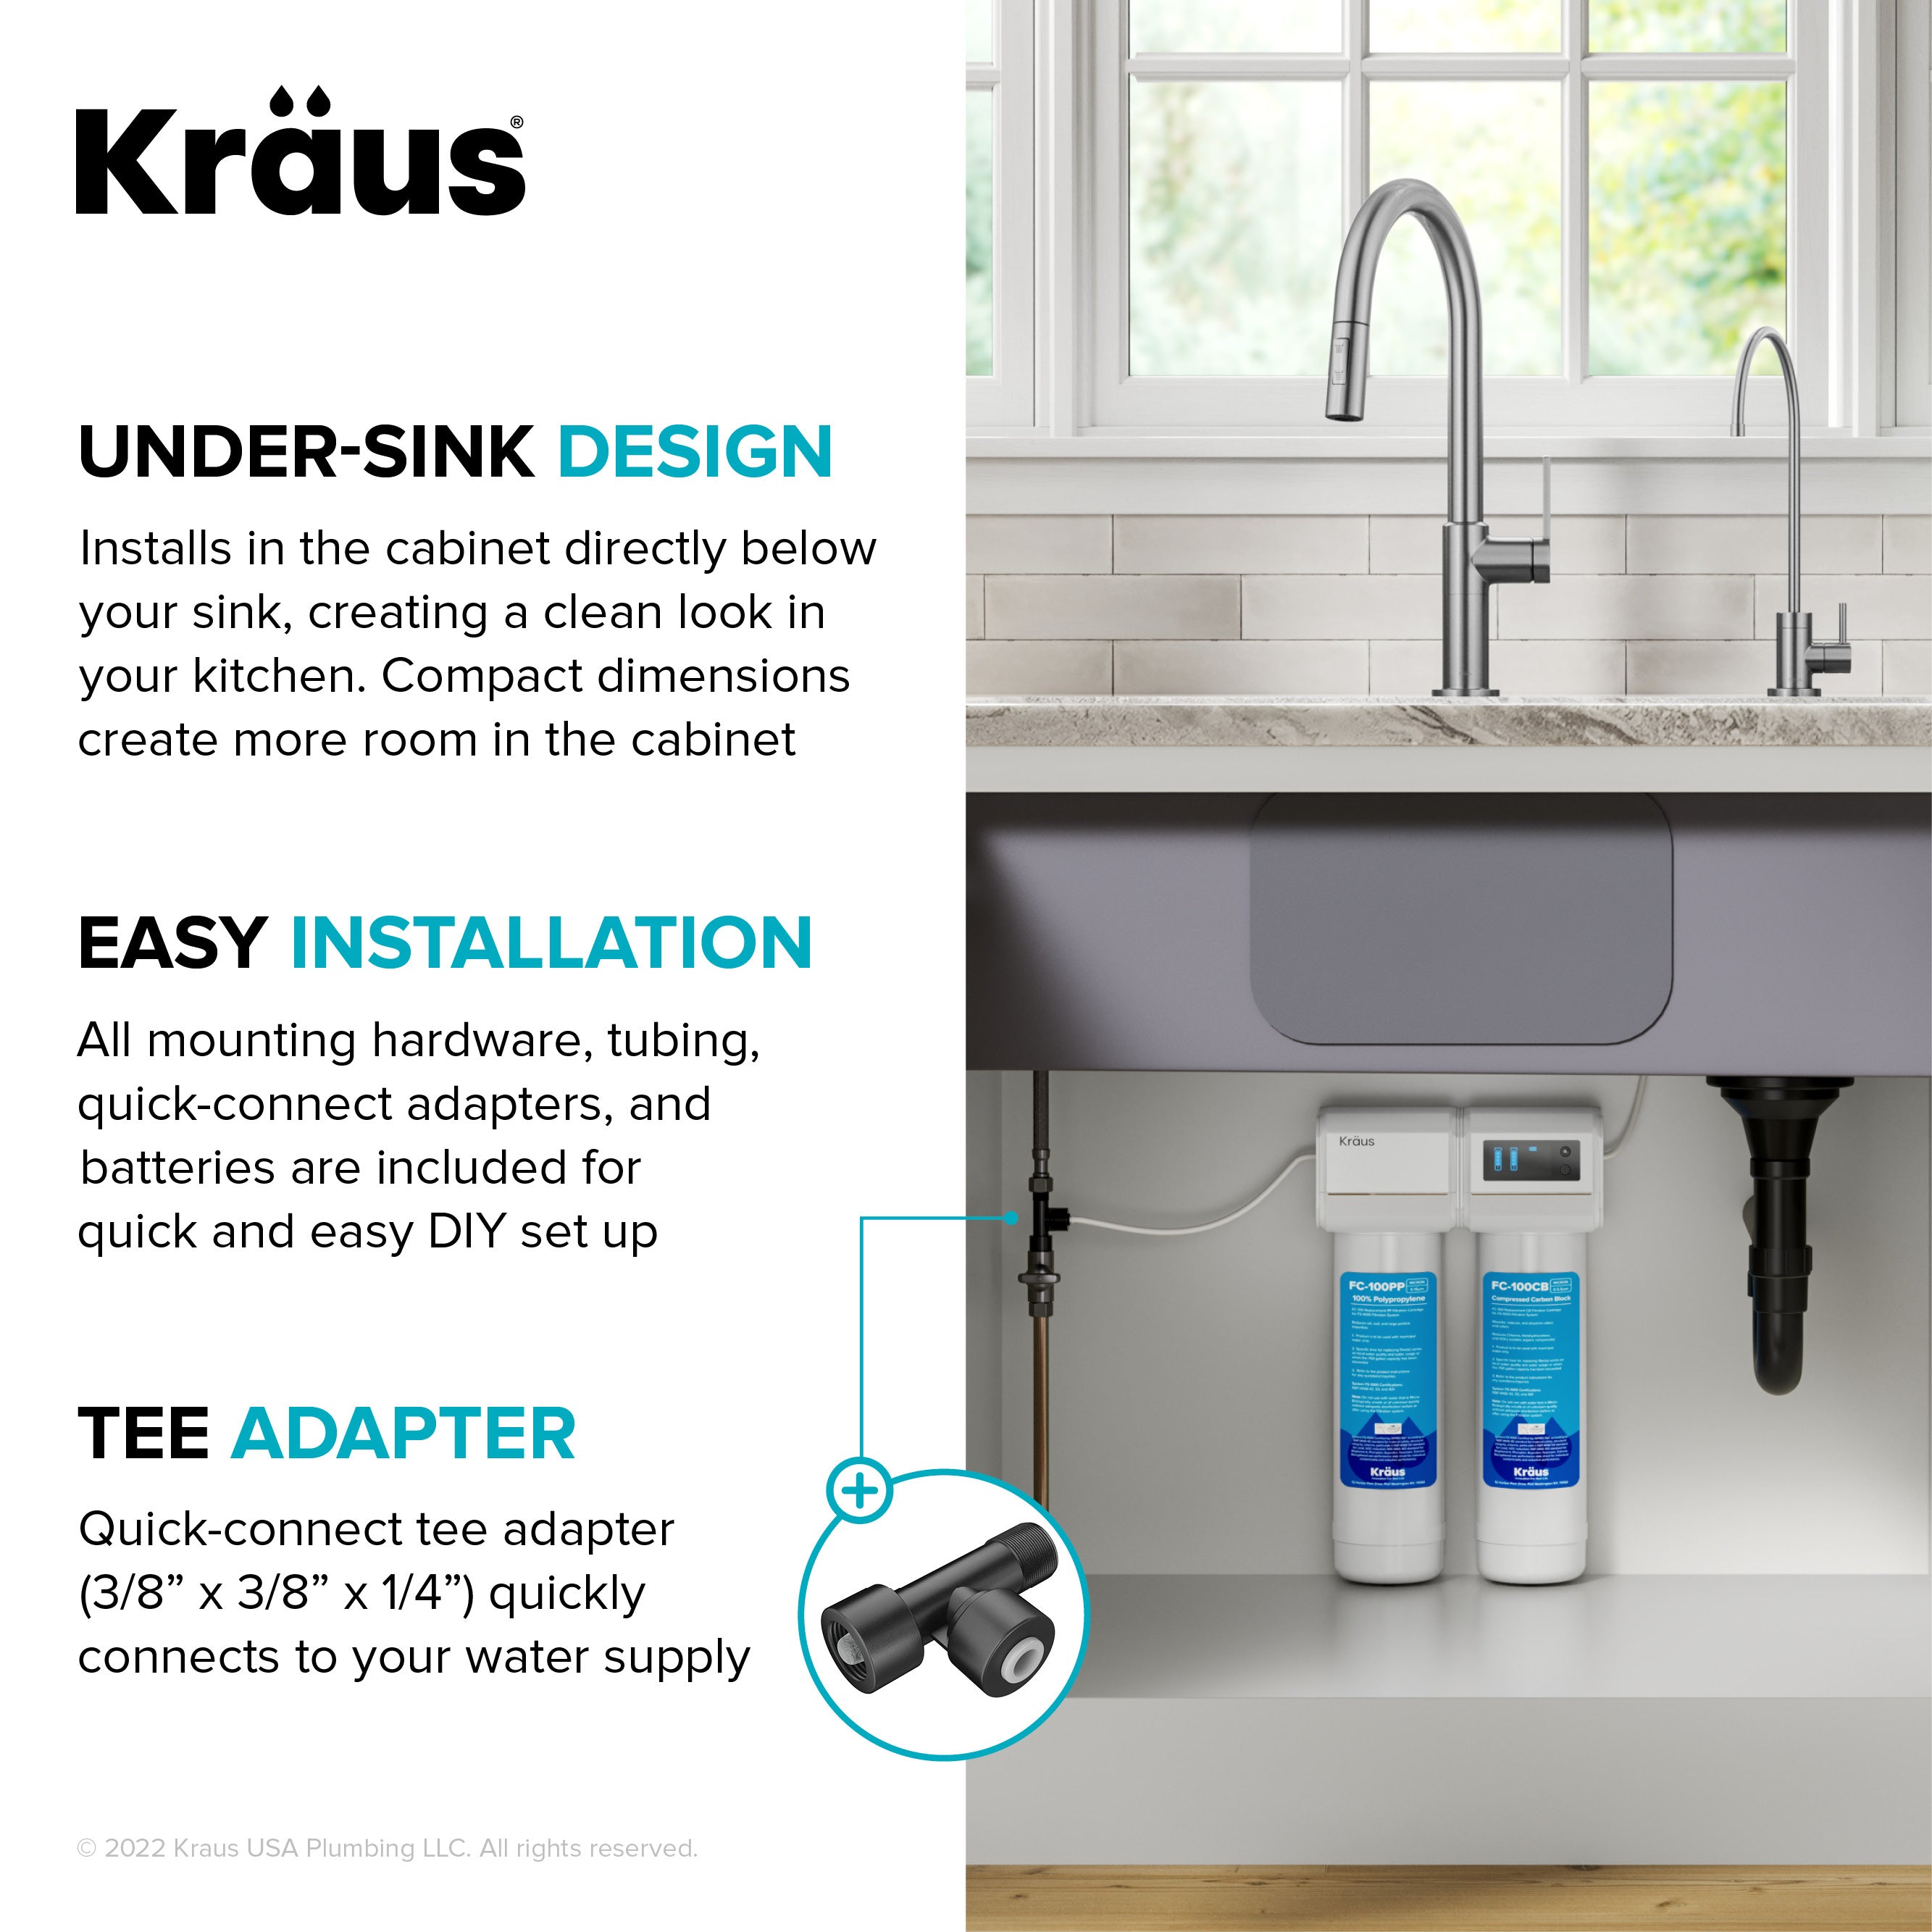 Water Filtration System  Under Sink & Faucet Filters for Kitchen